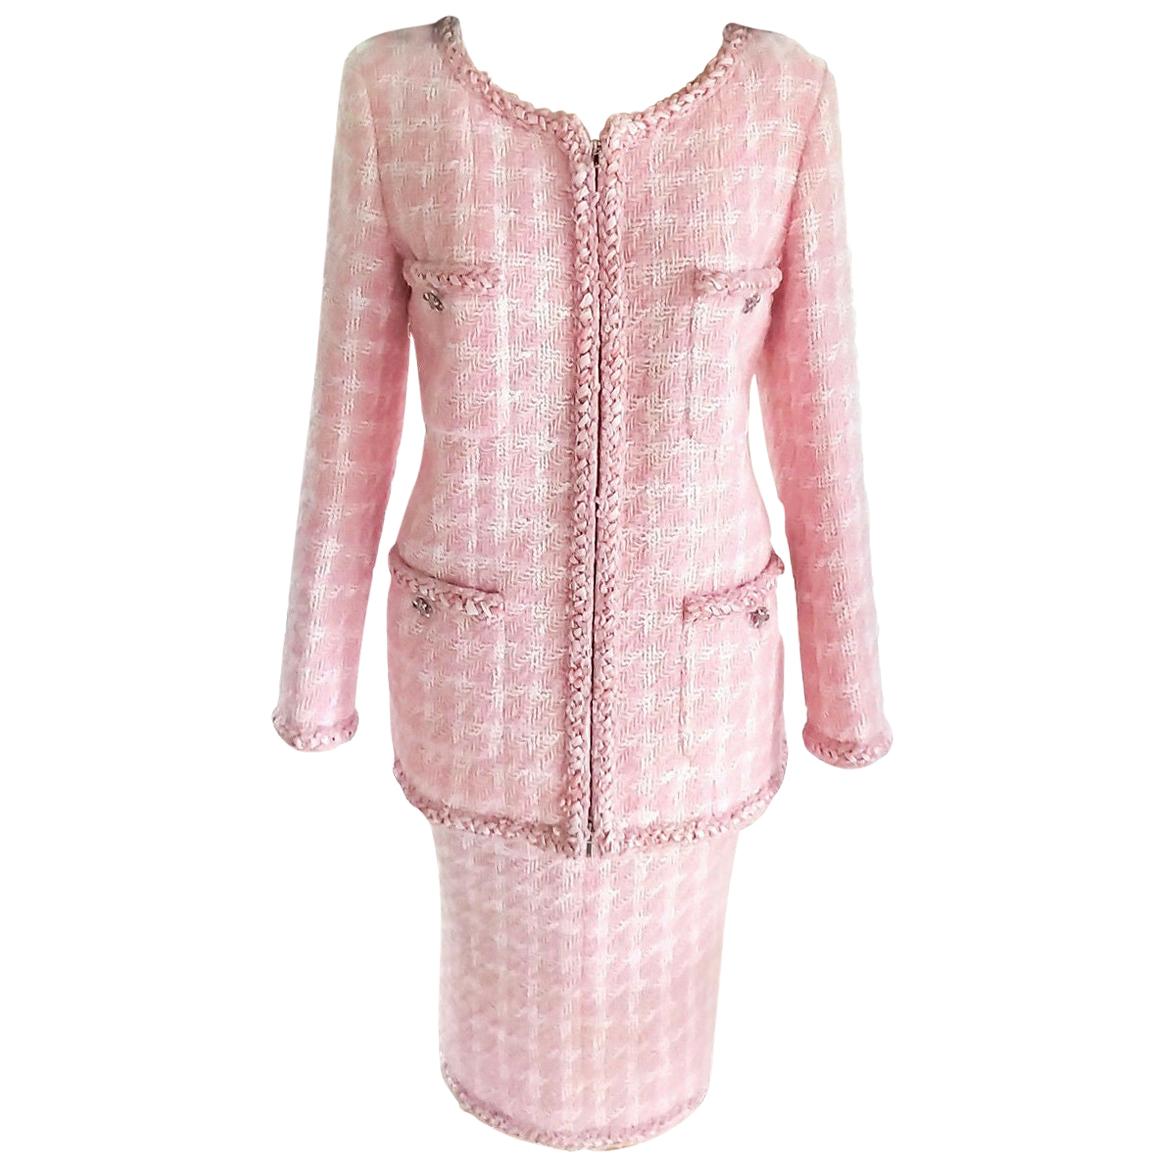 Chanel Suit 2014 - 2 For Sale on 1stDibs